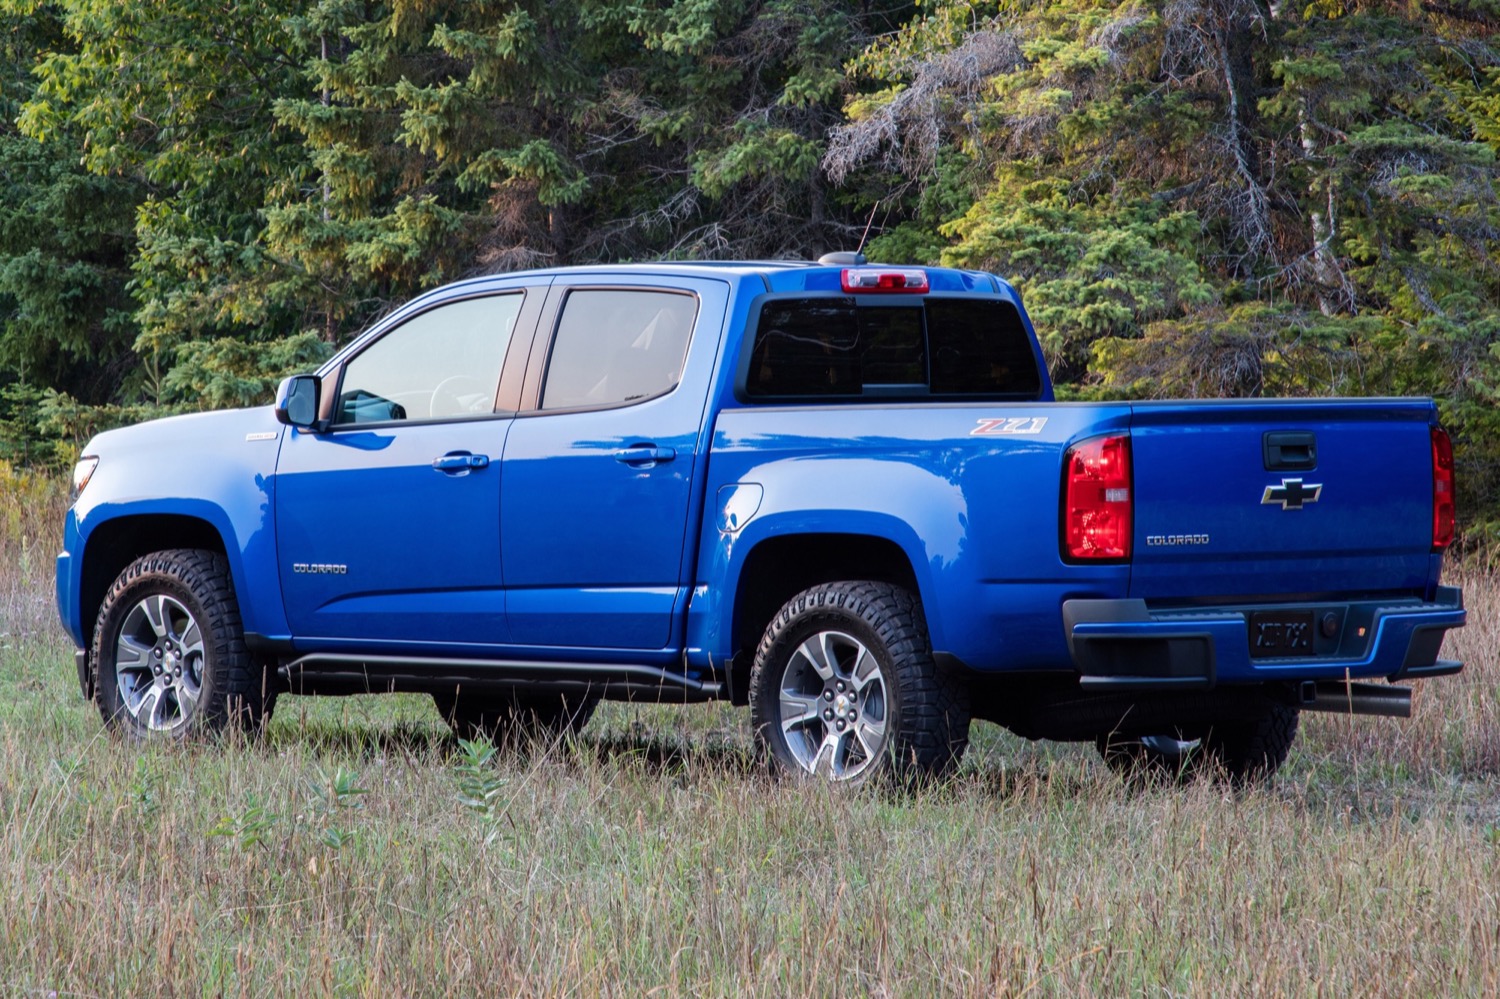 2019 Chevrolet Colorado Z71 Trail Runner Live Photo Gallery Gm Authority